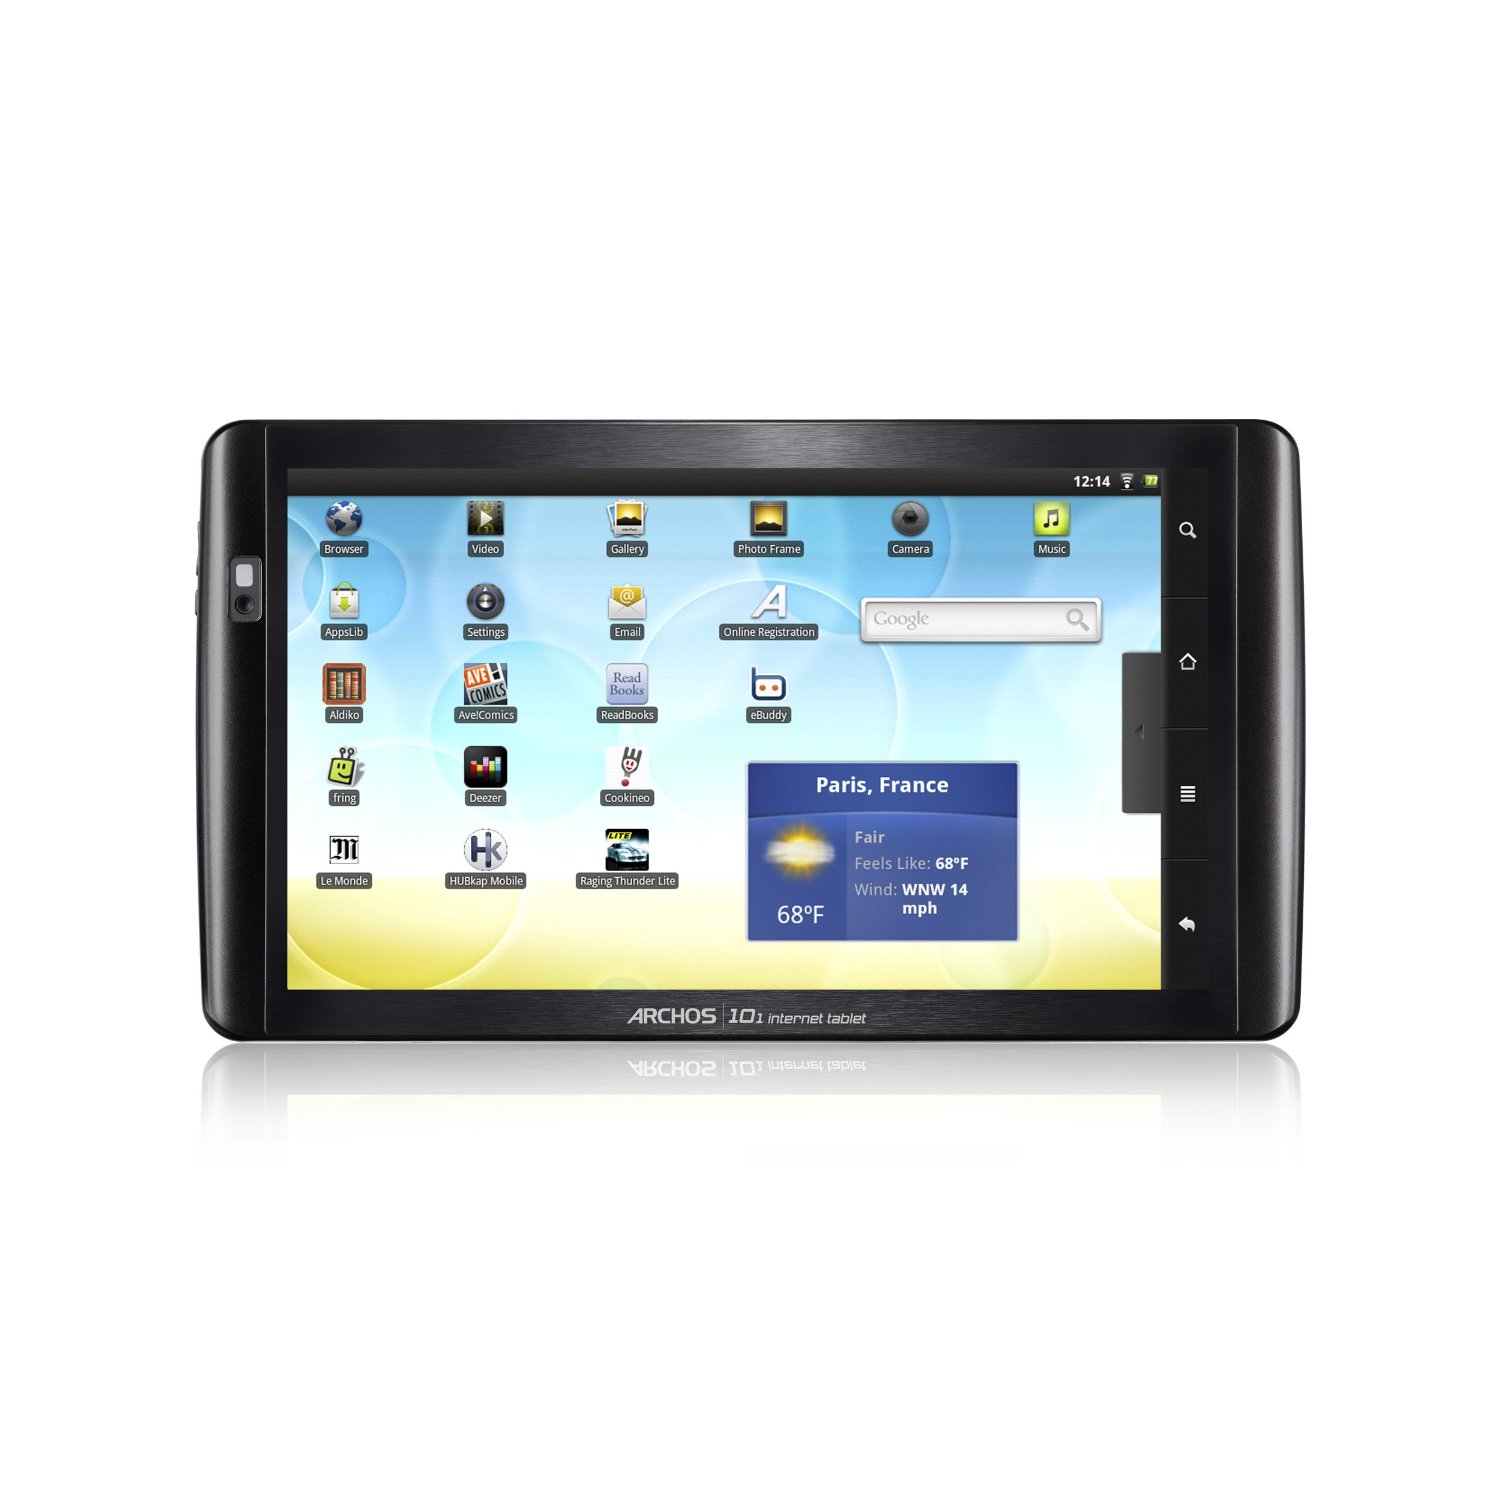 http://thetechjournal.com/wp-content/uploads/images/1110/1318017670-archos-101-android-powered-internet-tablet-2.jpg